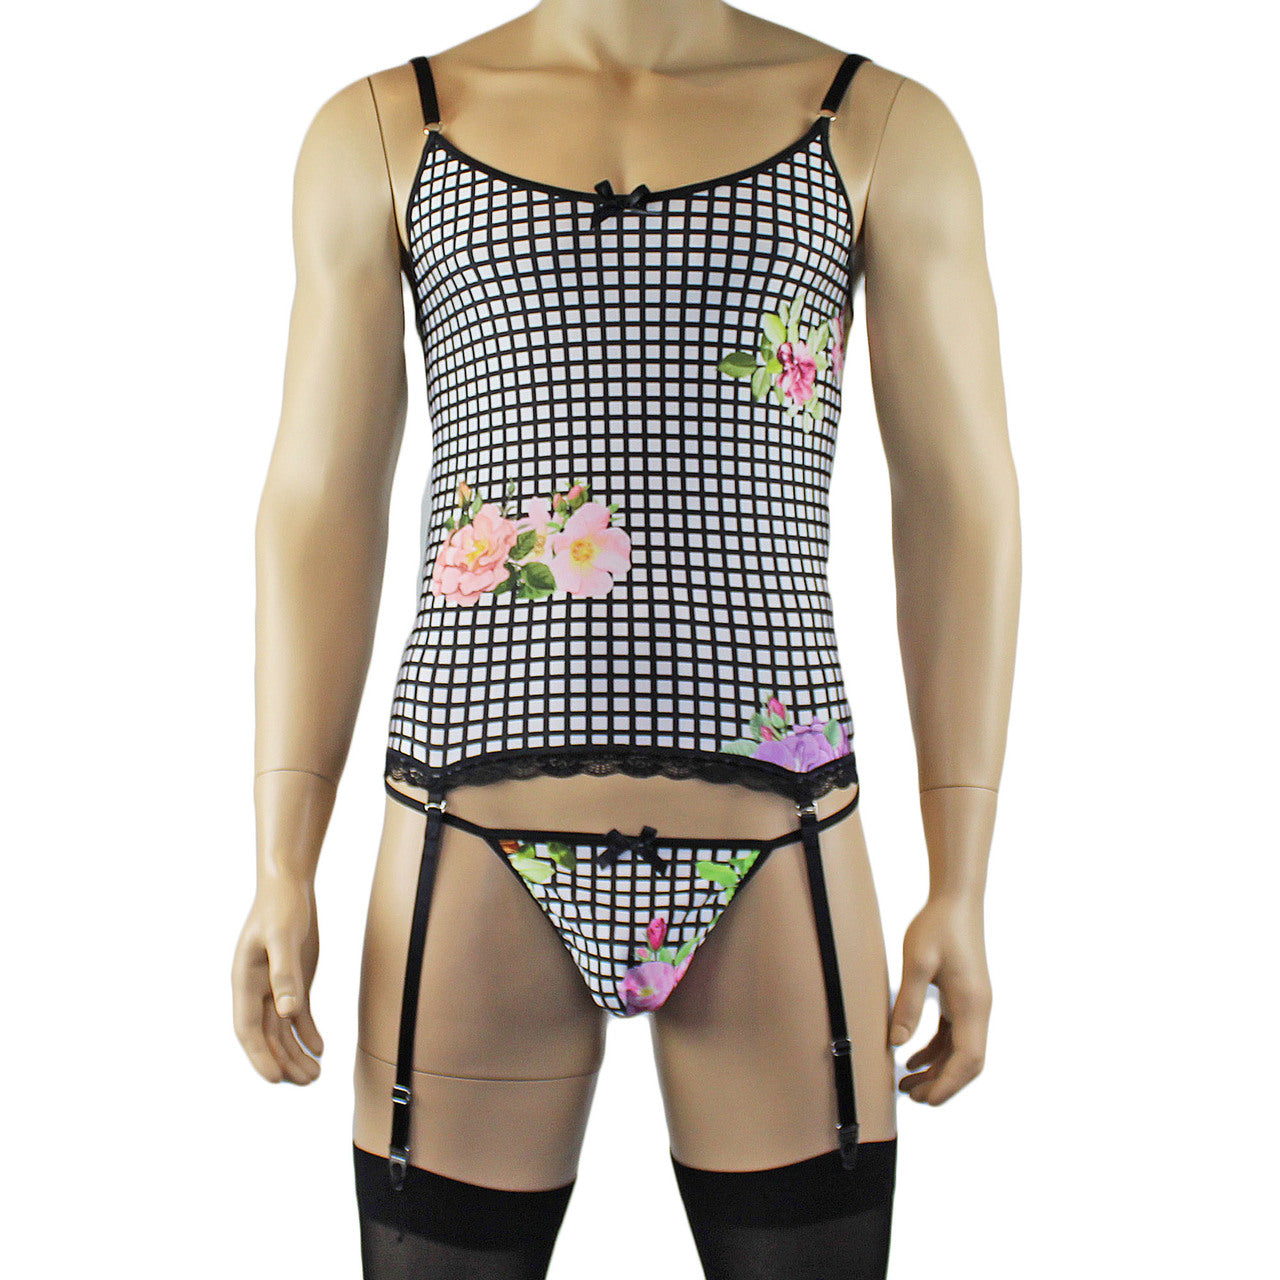 SALE - Mens Diana Camisole Corset Top in a Pretty Flower Checkered Spandex